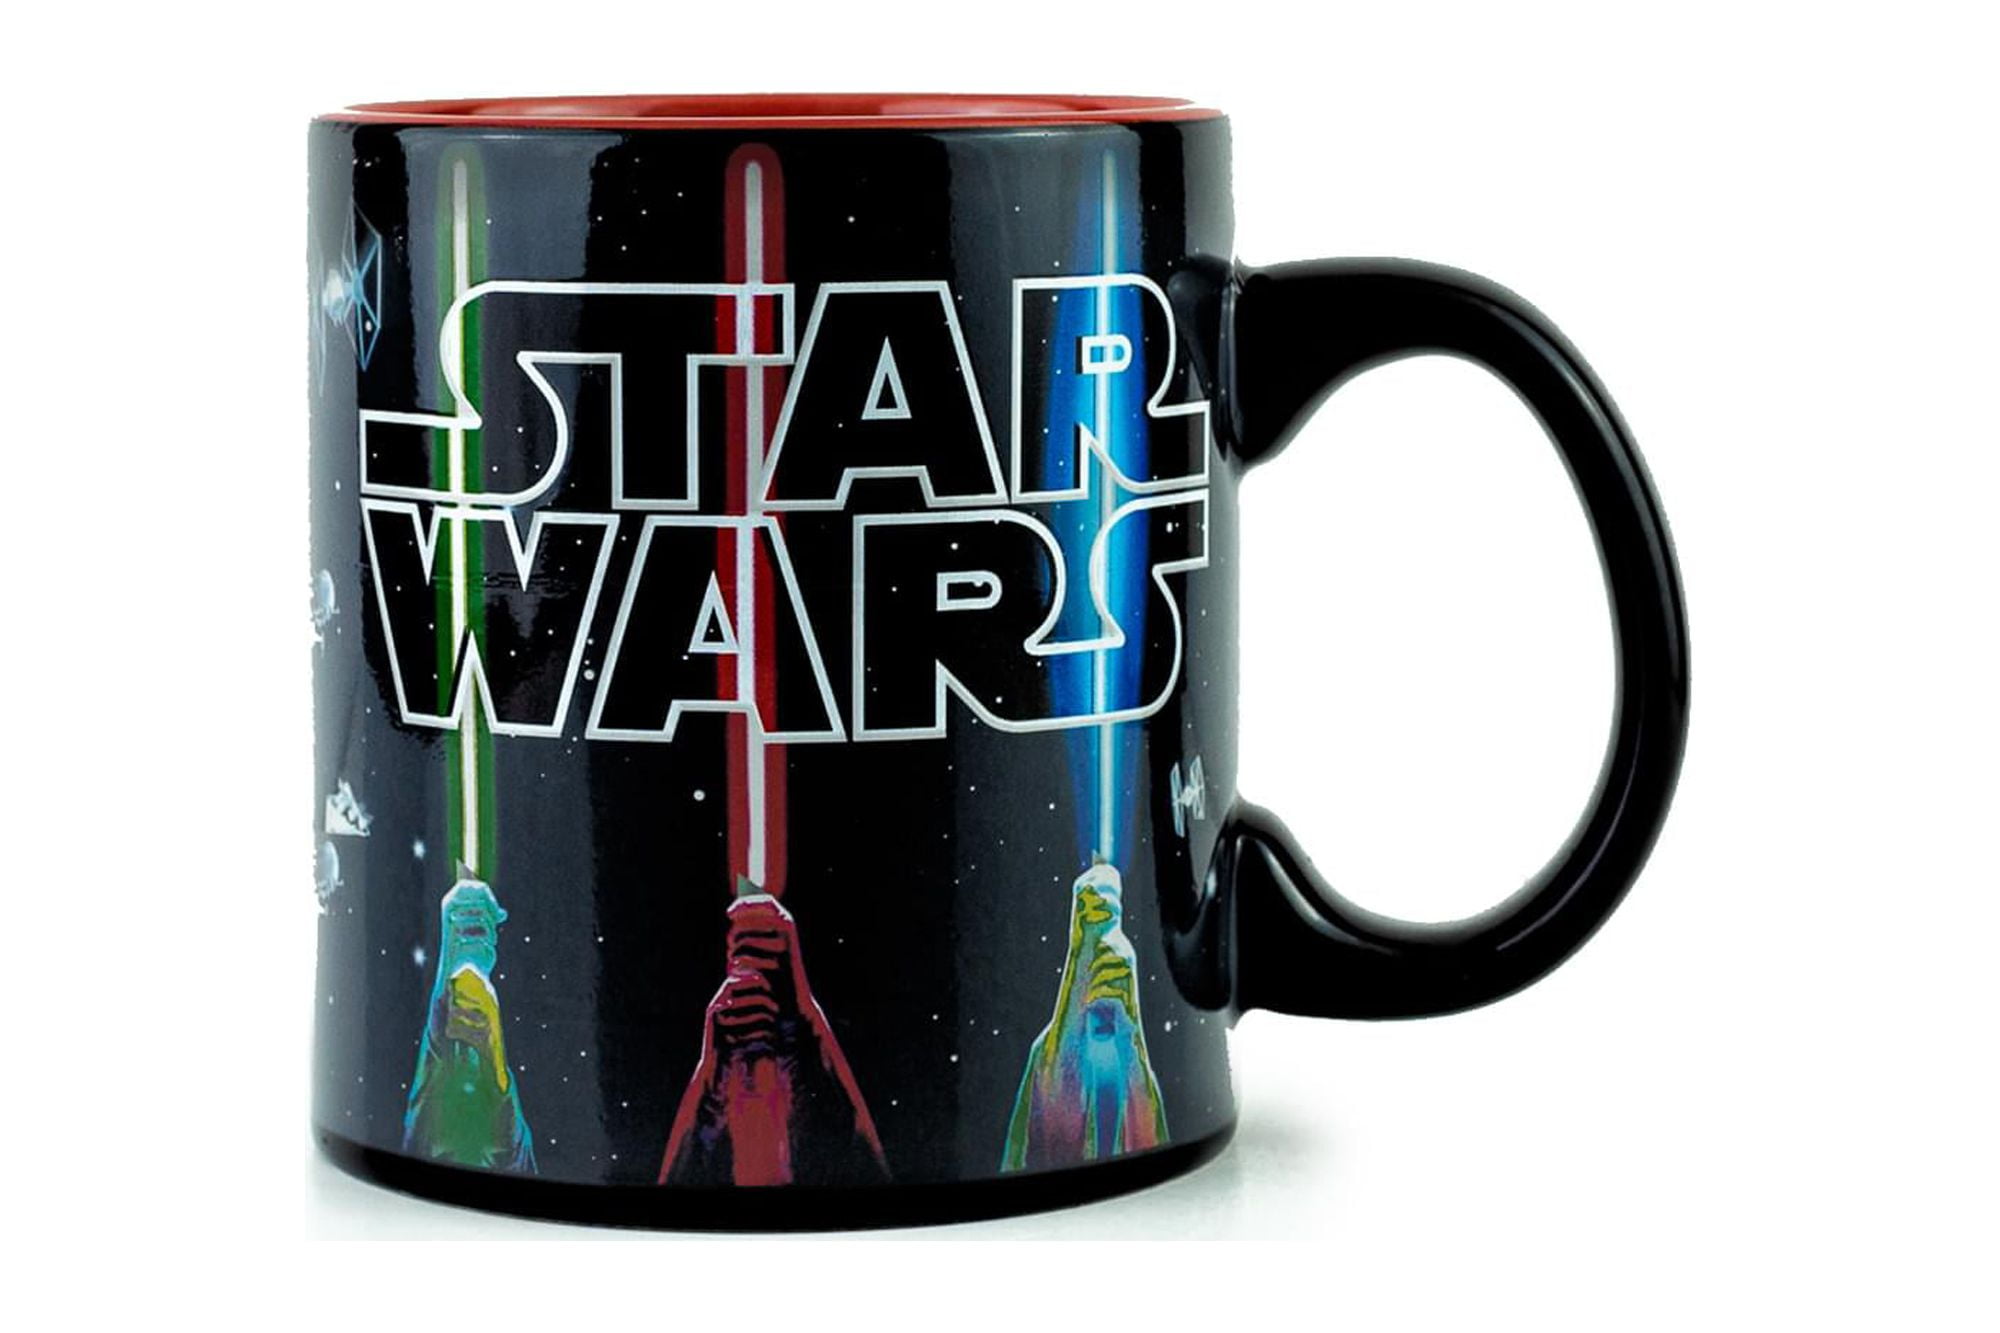  STAR WARS Rey Heat Changing Coffee Mug, 20oz - Lightsaber Image  Reveals with Heat - Ceramic - Officially Licensed - Gift for Kids and  Adults : Home & Kitchen